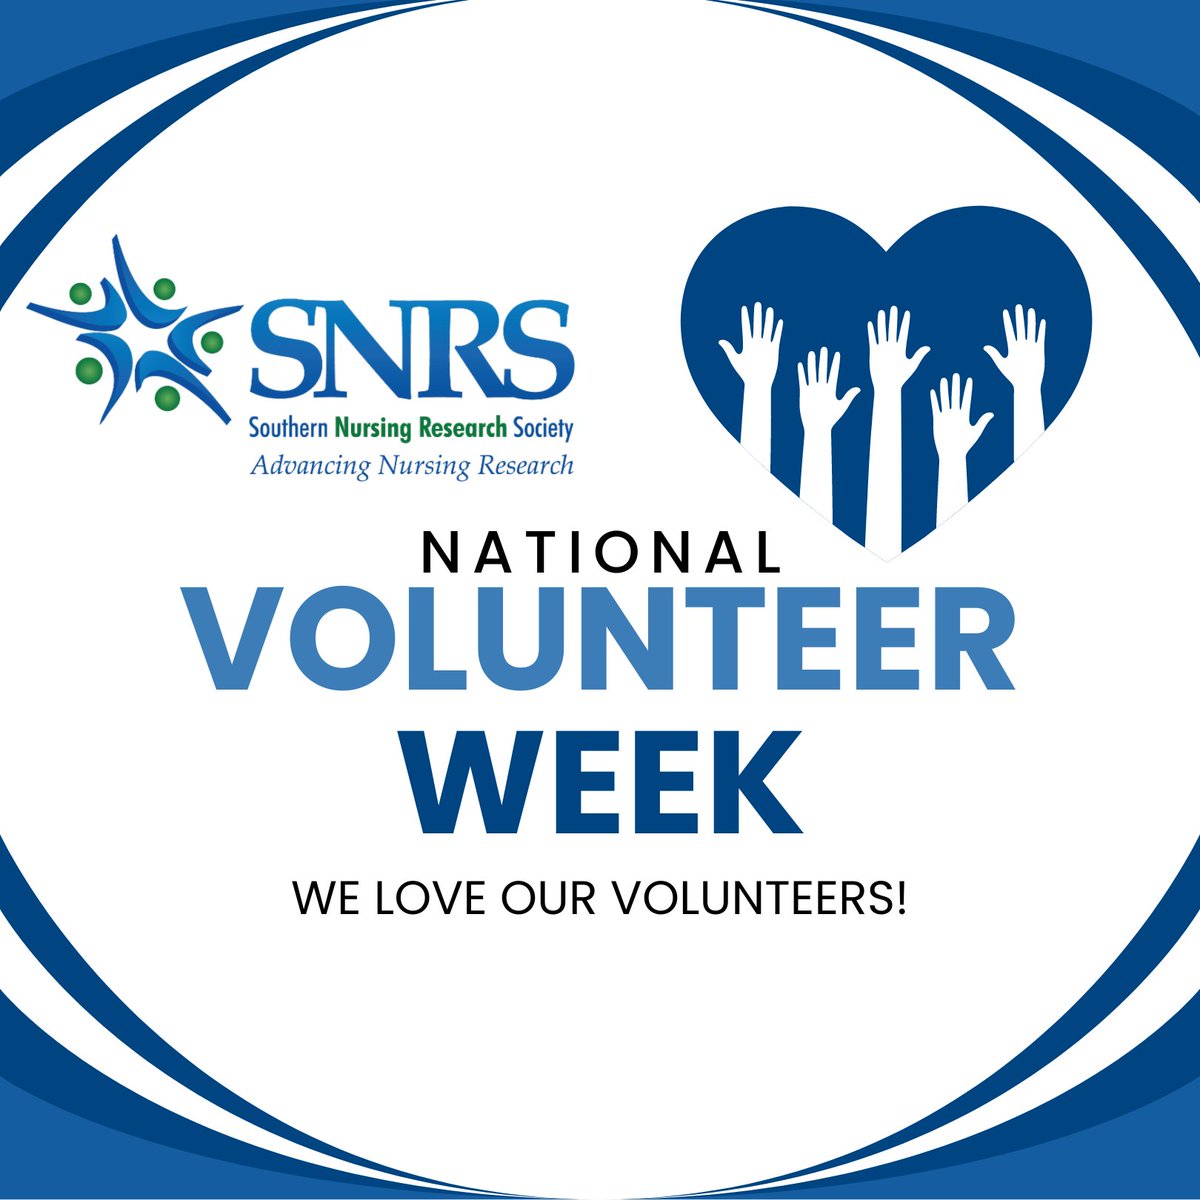 Thank you to all of our SNRS Volunteers, for the time and commitment you have for SNRS and nursing research. We appreciate you! 💙 #NationalVolunteerWeek